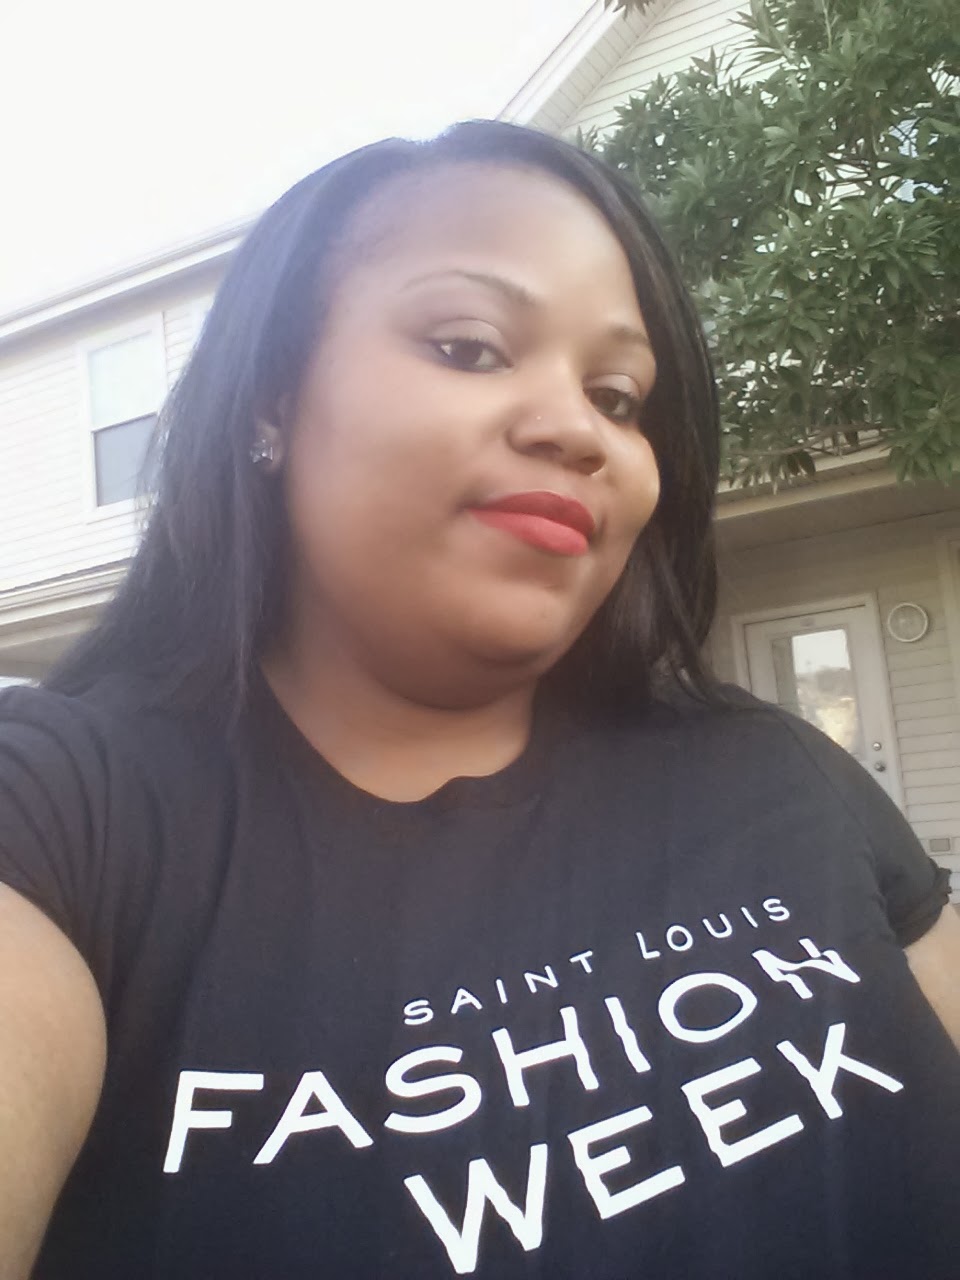 EDUCATED GLAMOUR GIRL: St. Louis Fashion Week Show #2